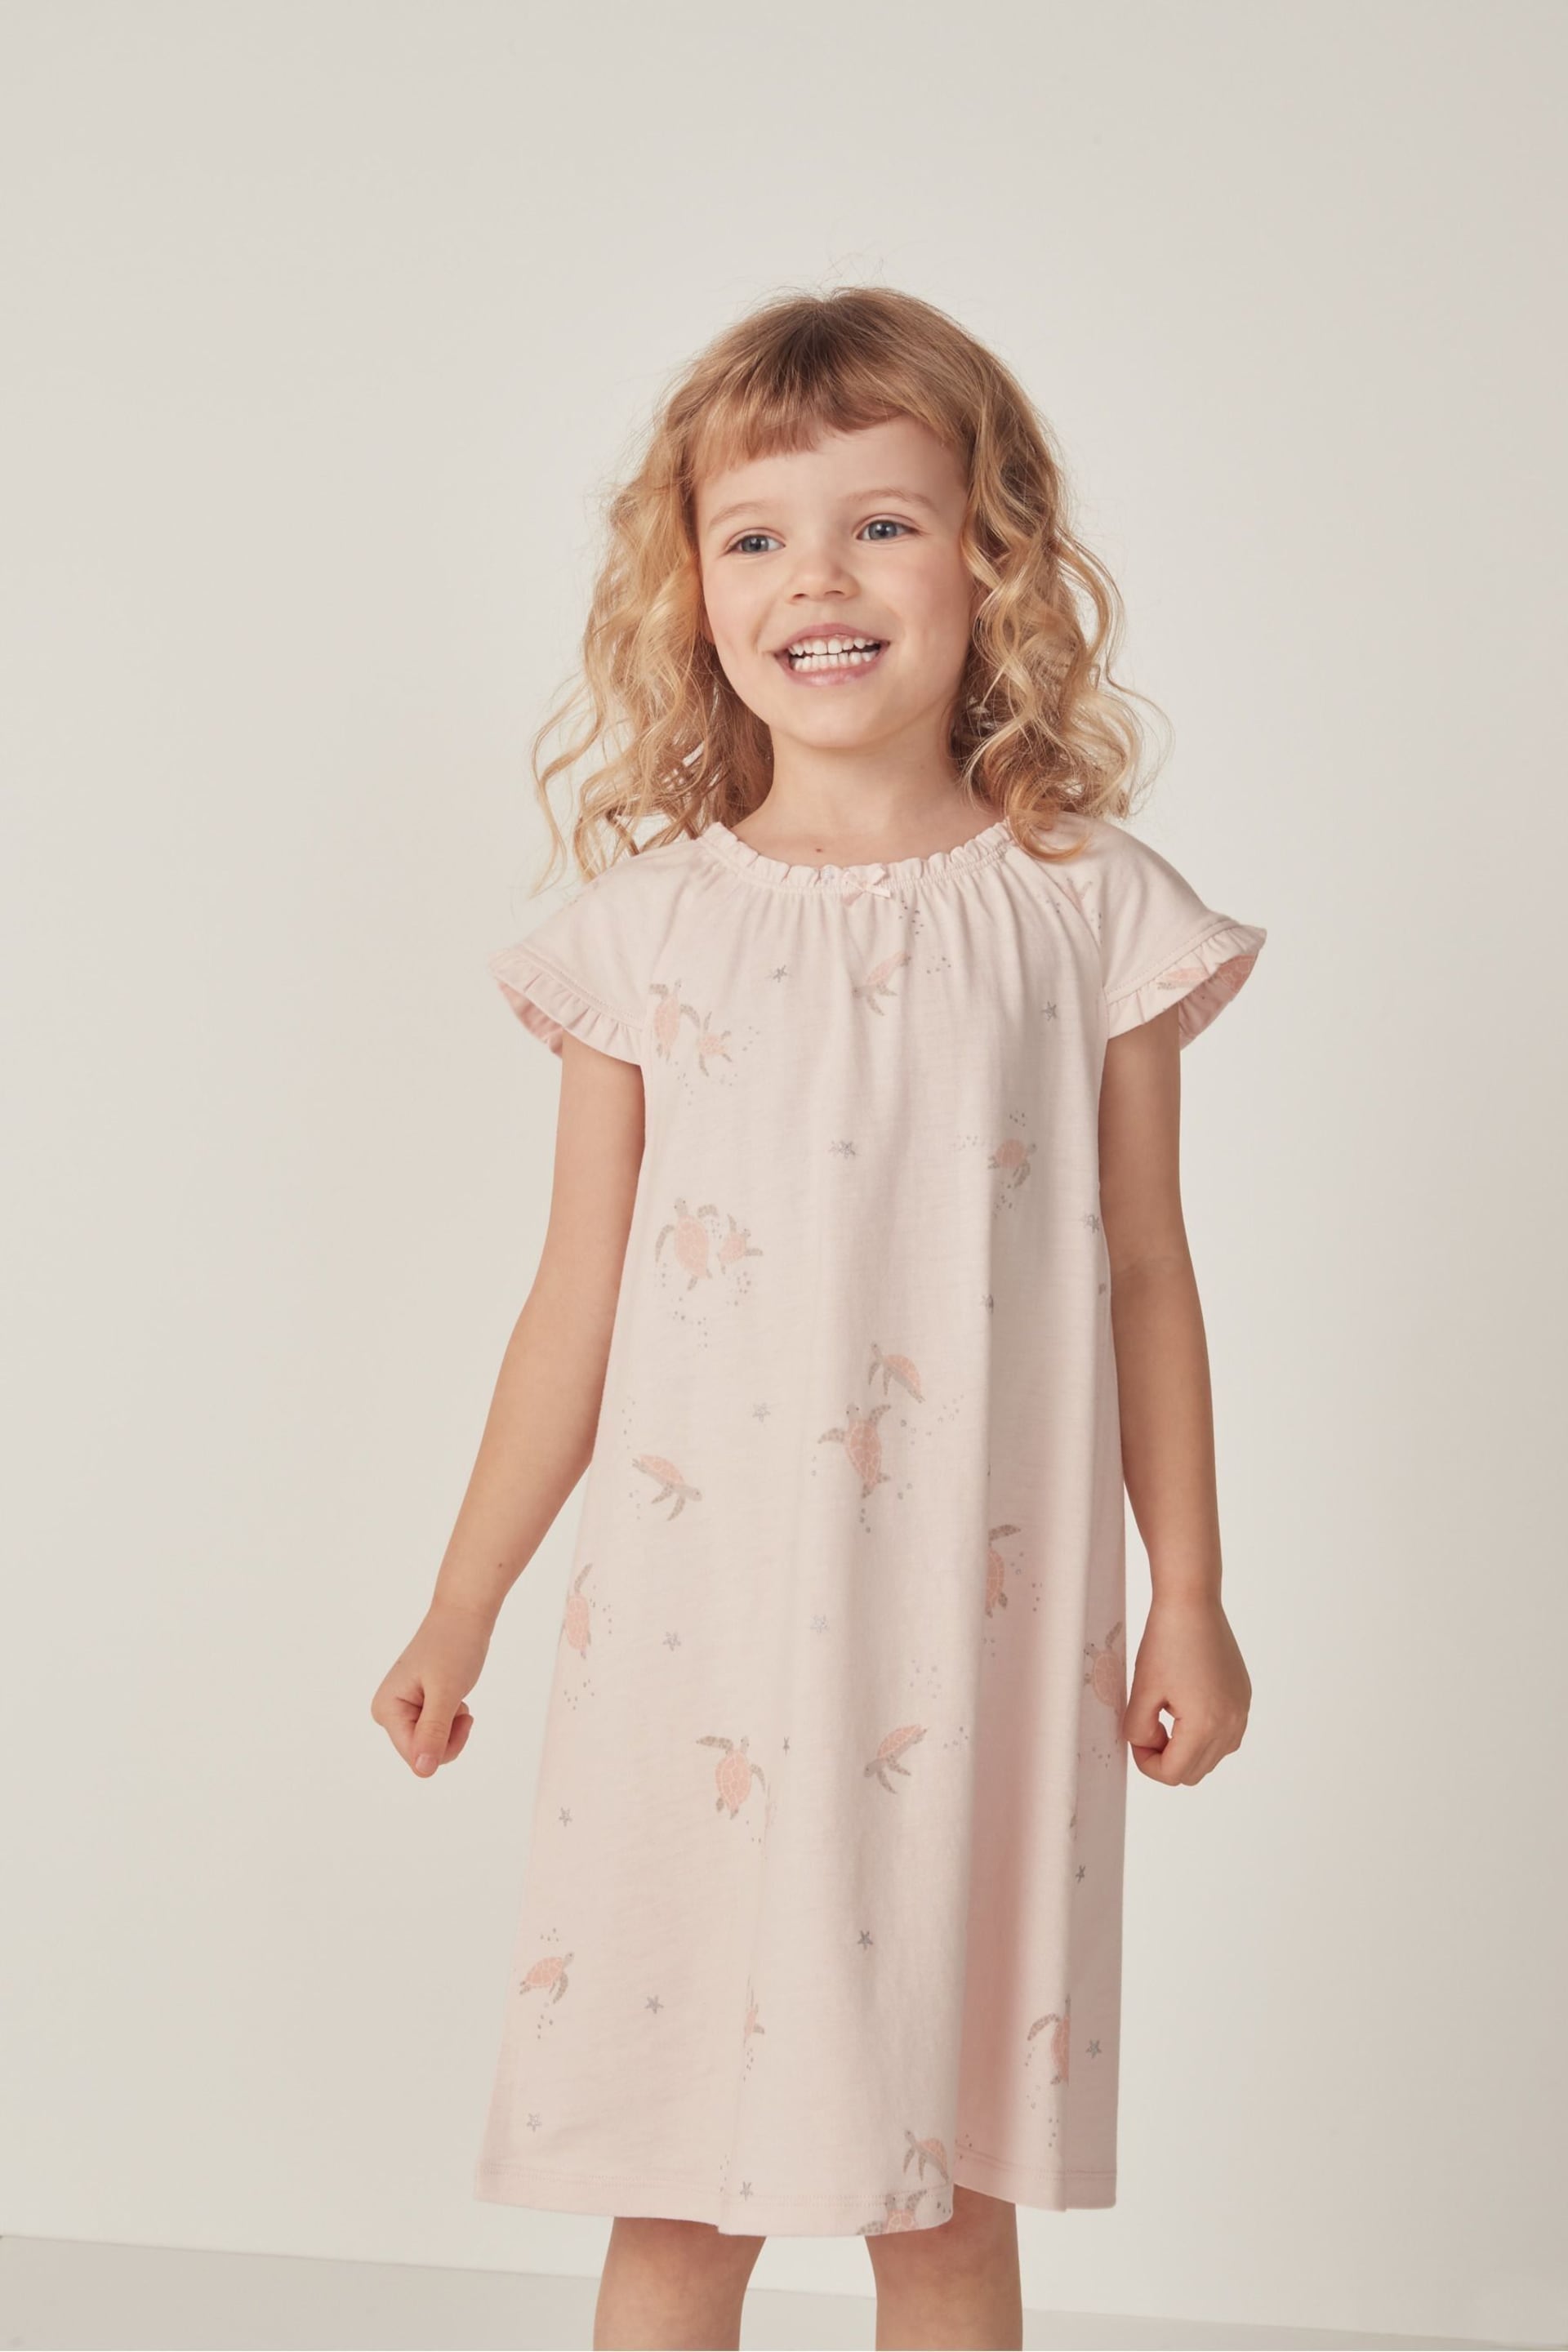 The White Company Turtle Print White Nightdress - Image 3 of 6